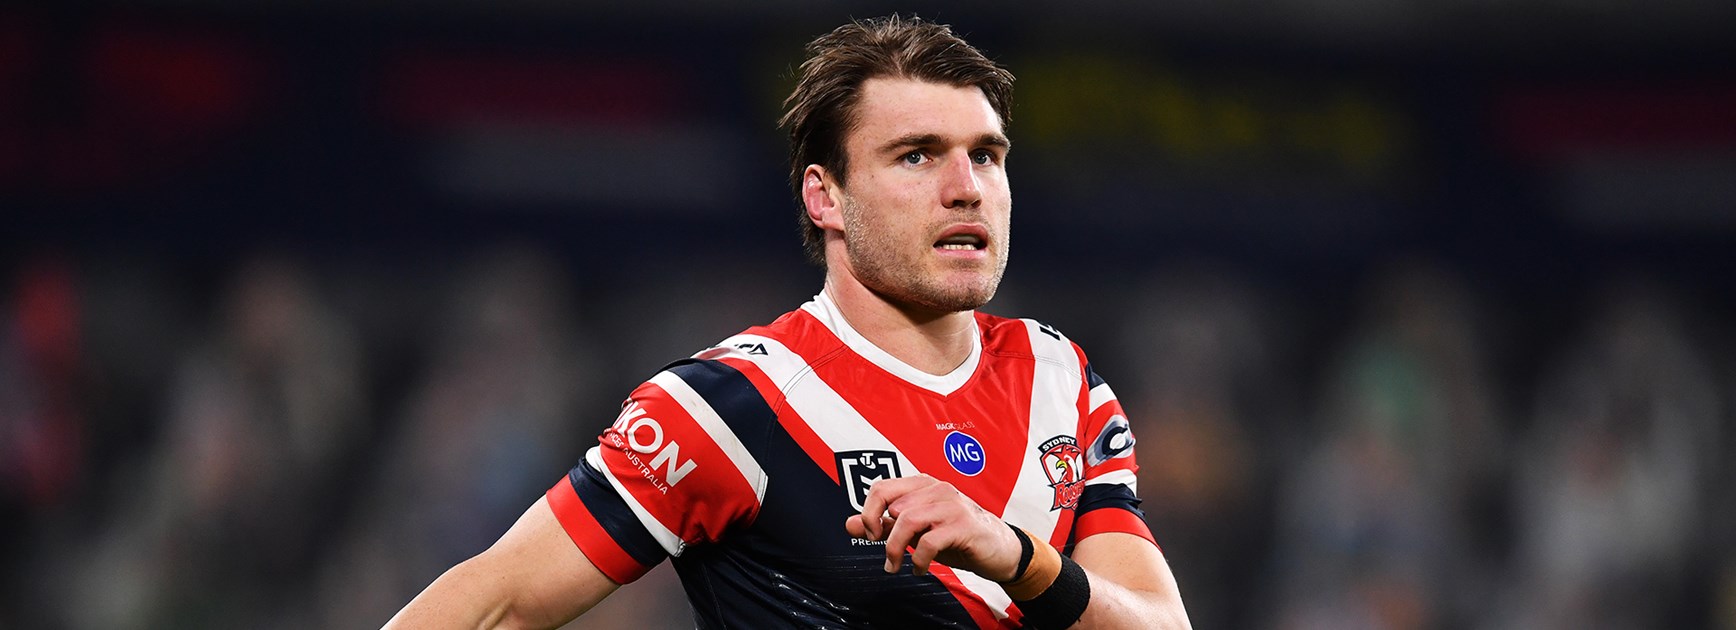 'Learnt a lot': How Origin axing helped Crichton